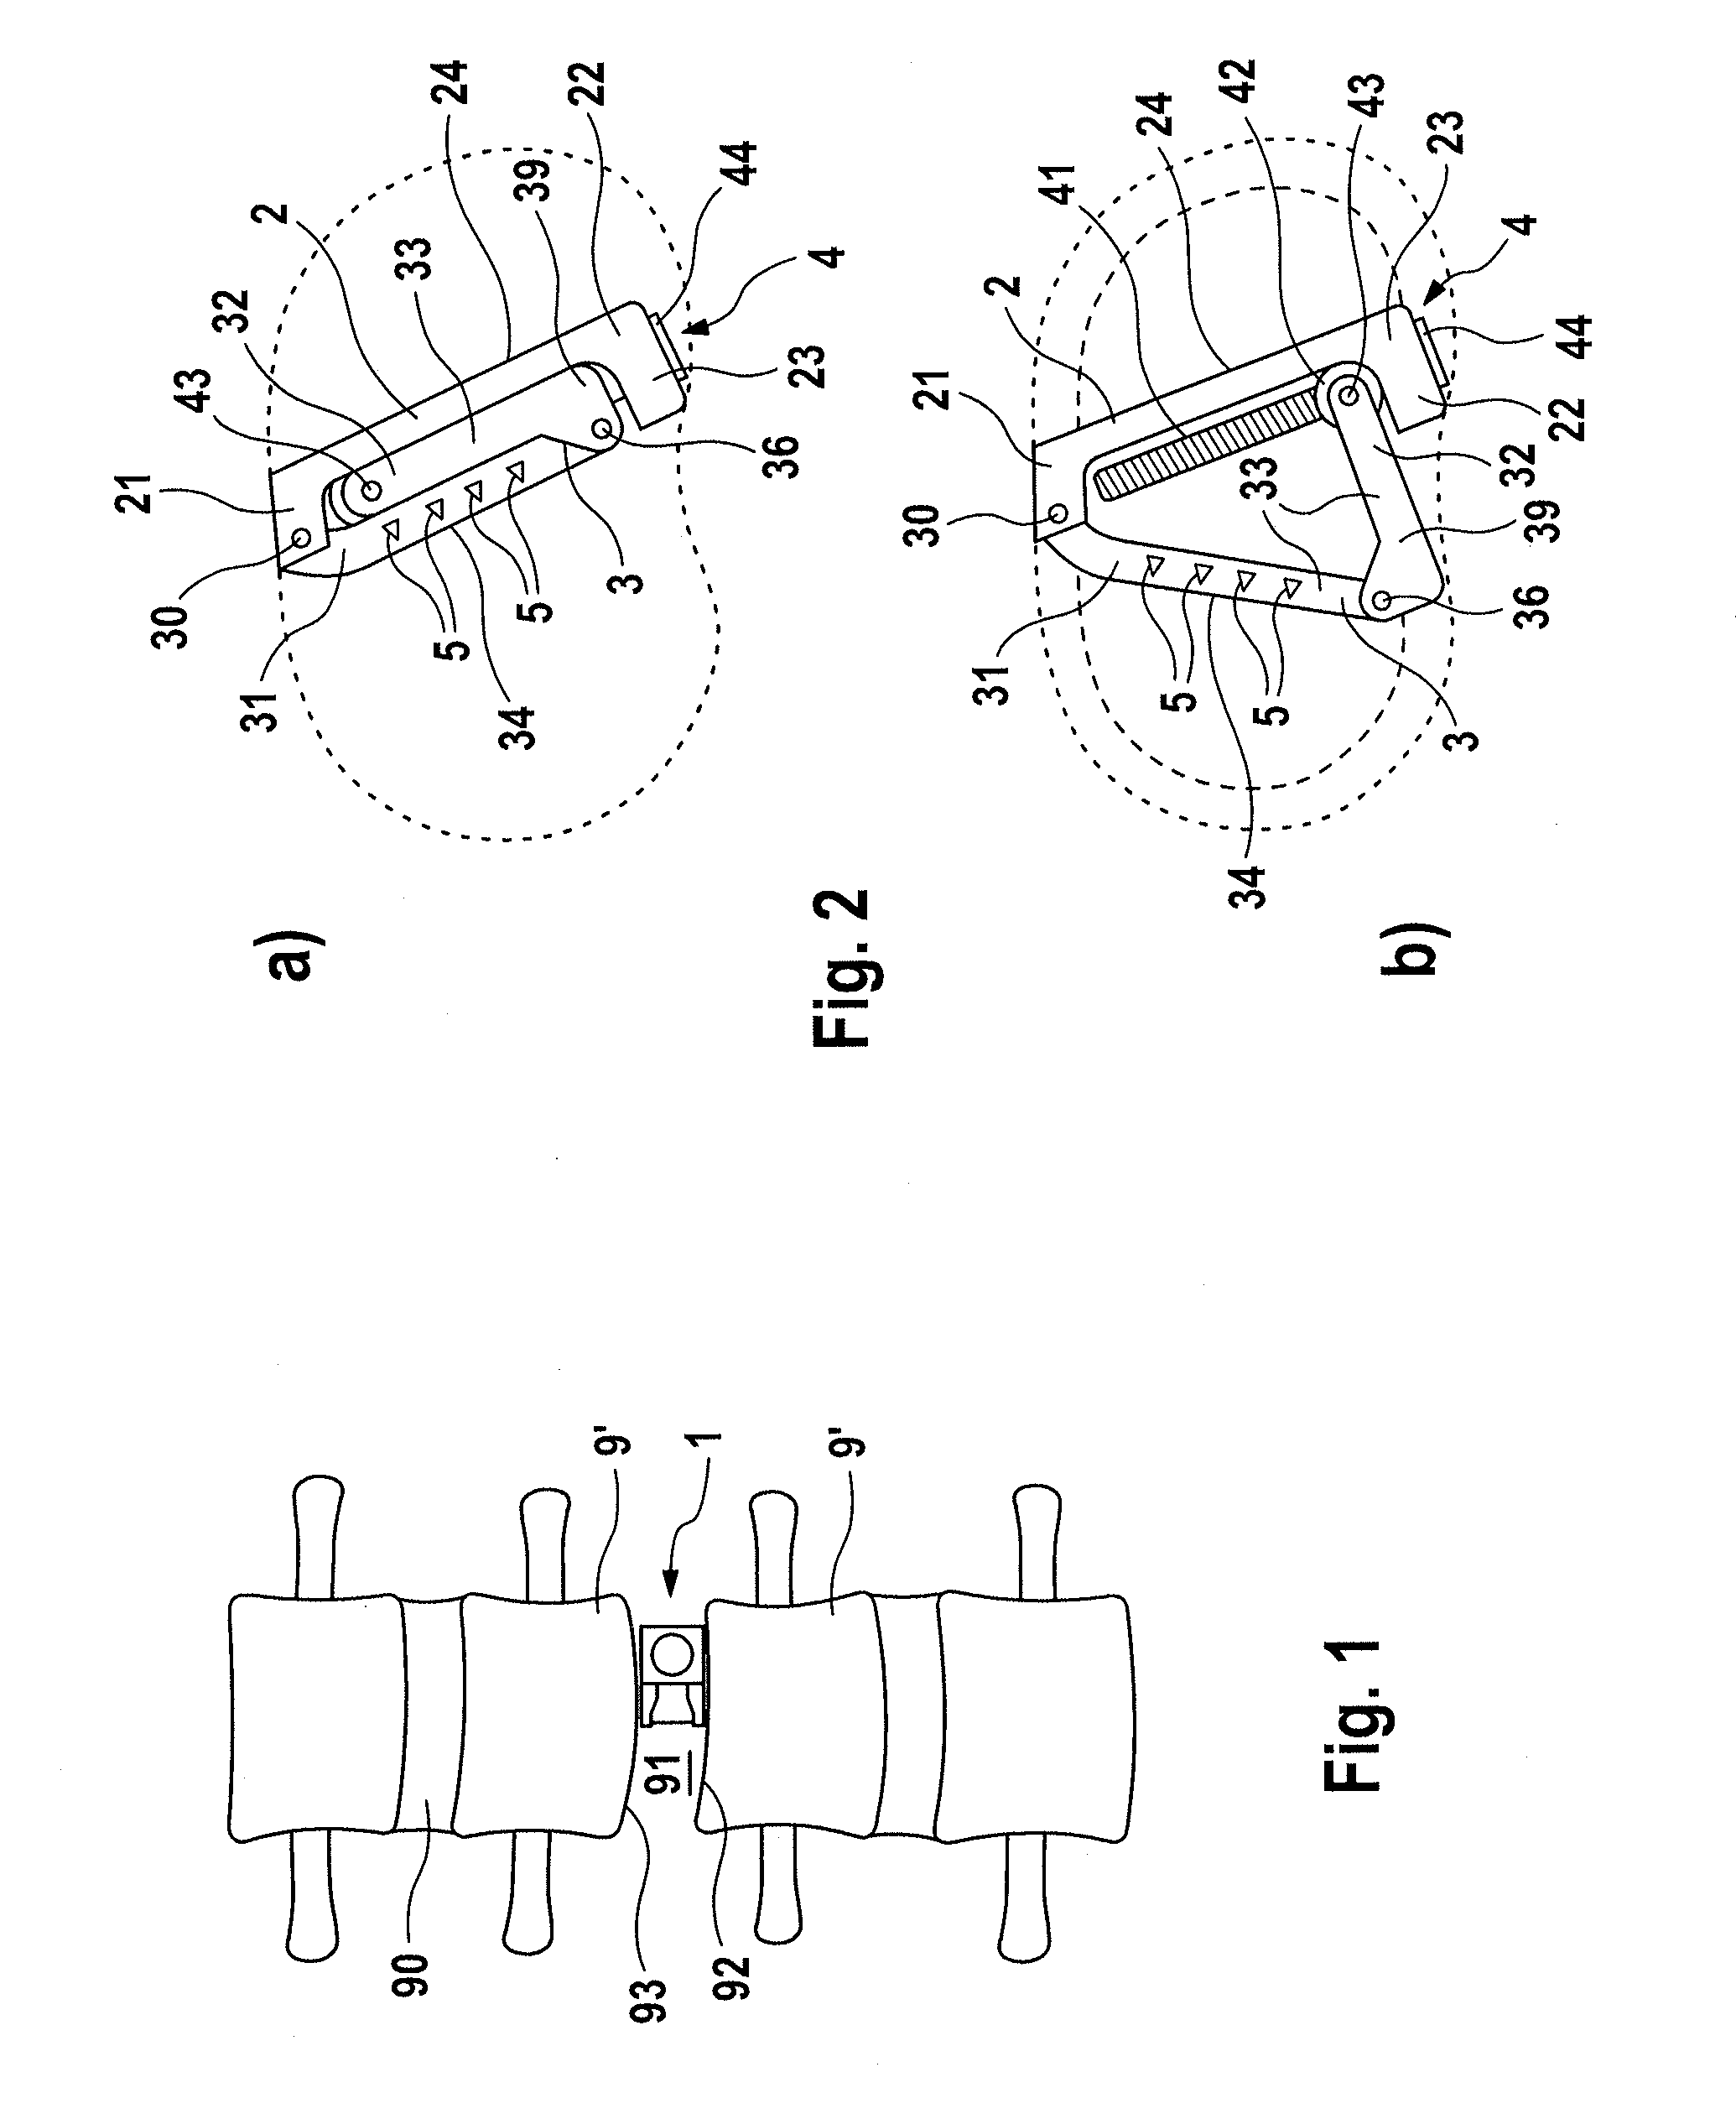 Laterally expandable intervertebral fusion implant